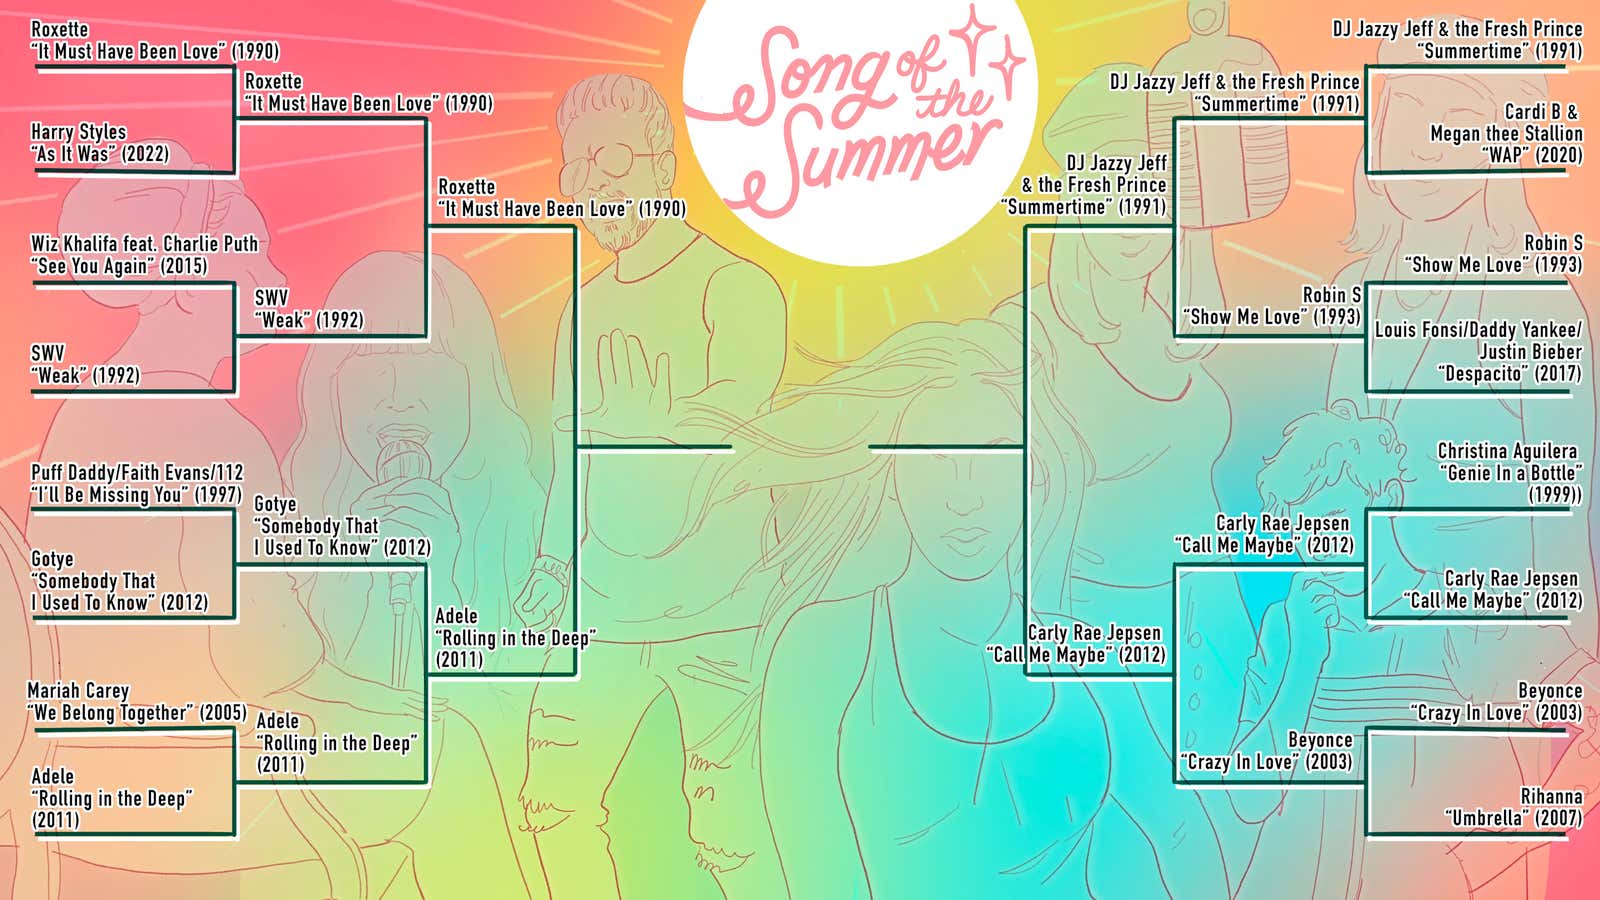 Jezebel's Song of the Summer Tournament Round 3: These Results Are 'Crazy'